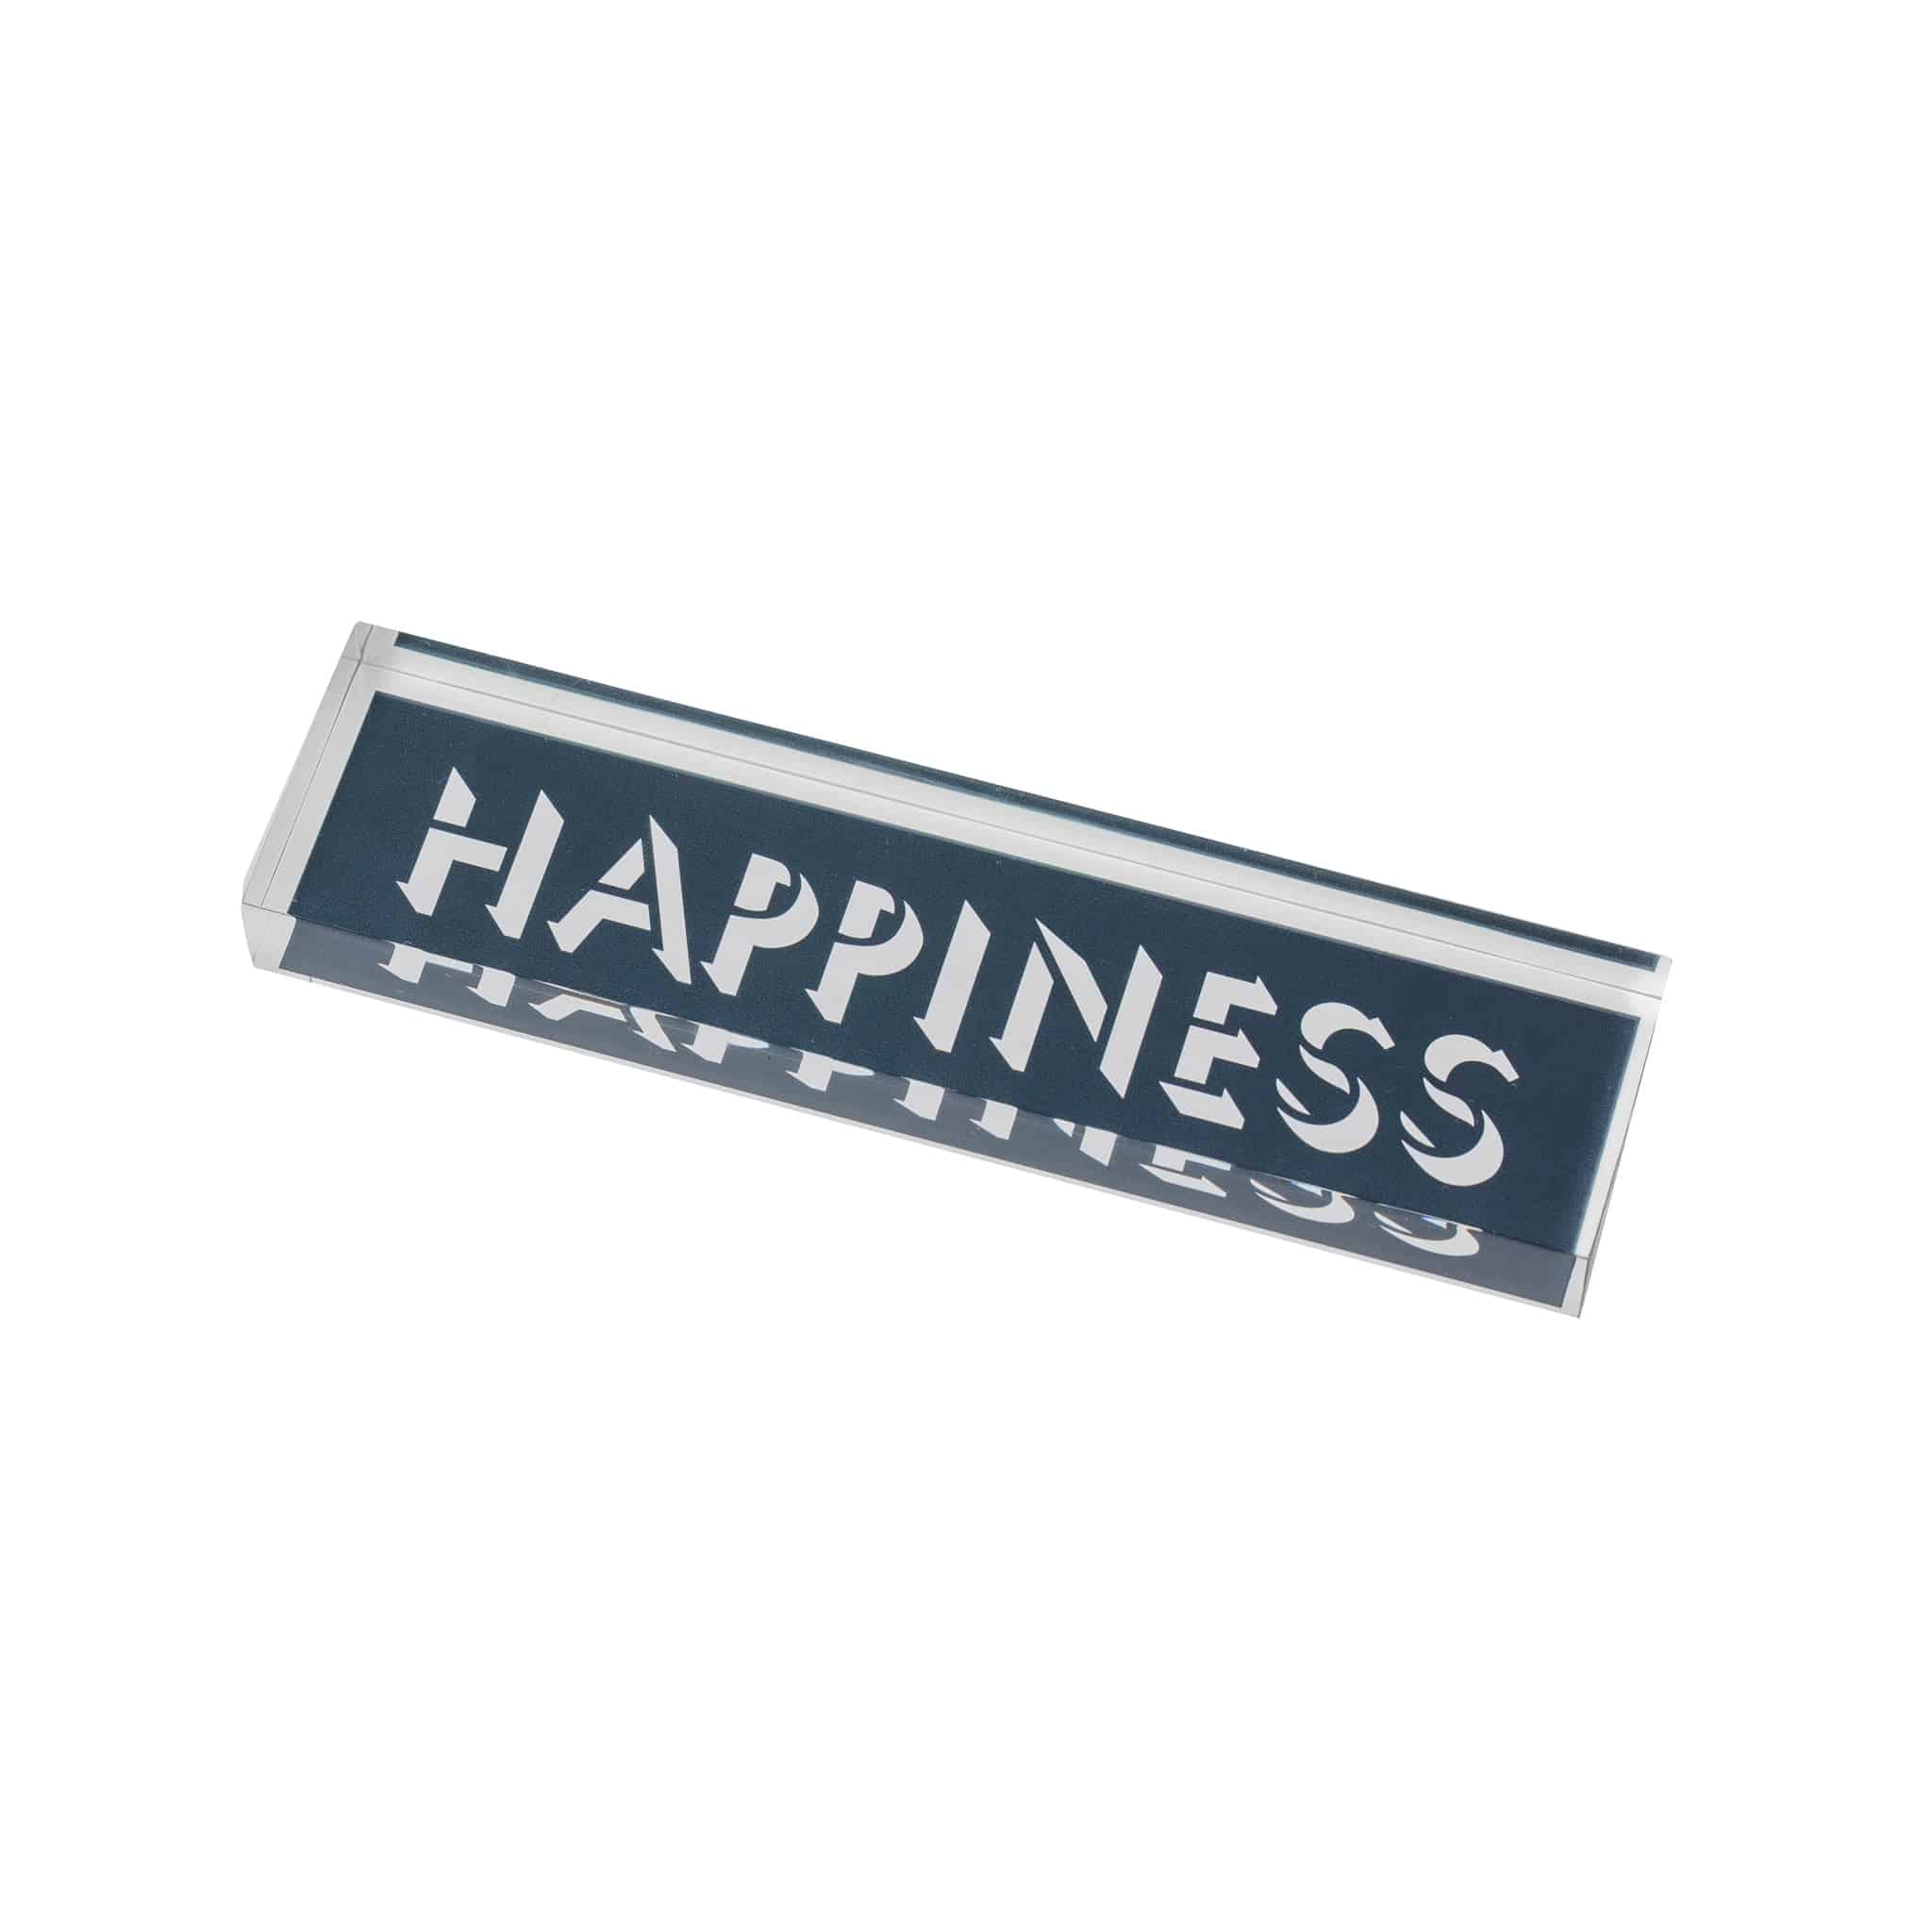 PAPER WEIGHT LONG | Happiness Grey